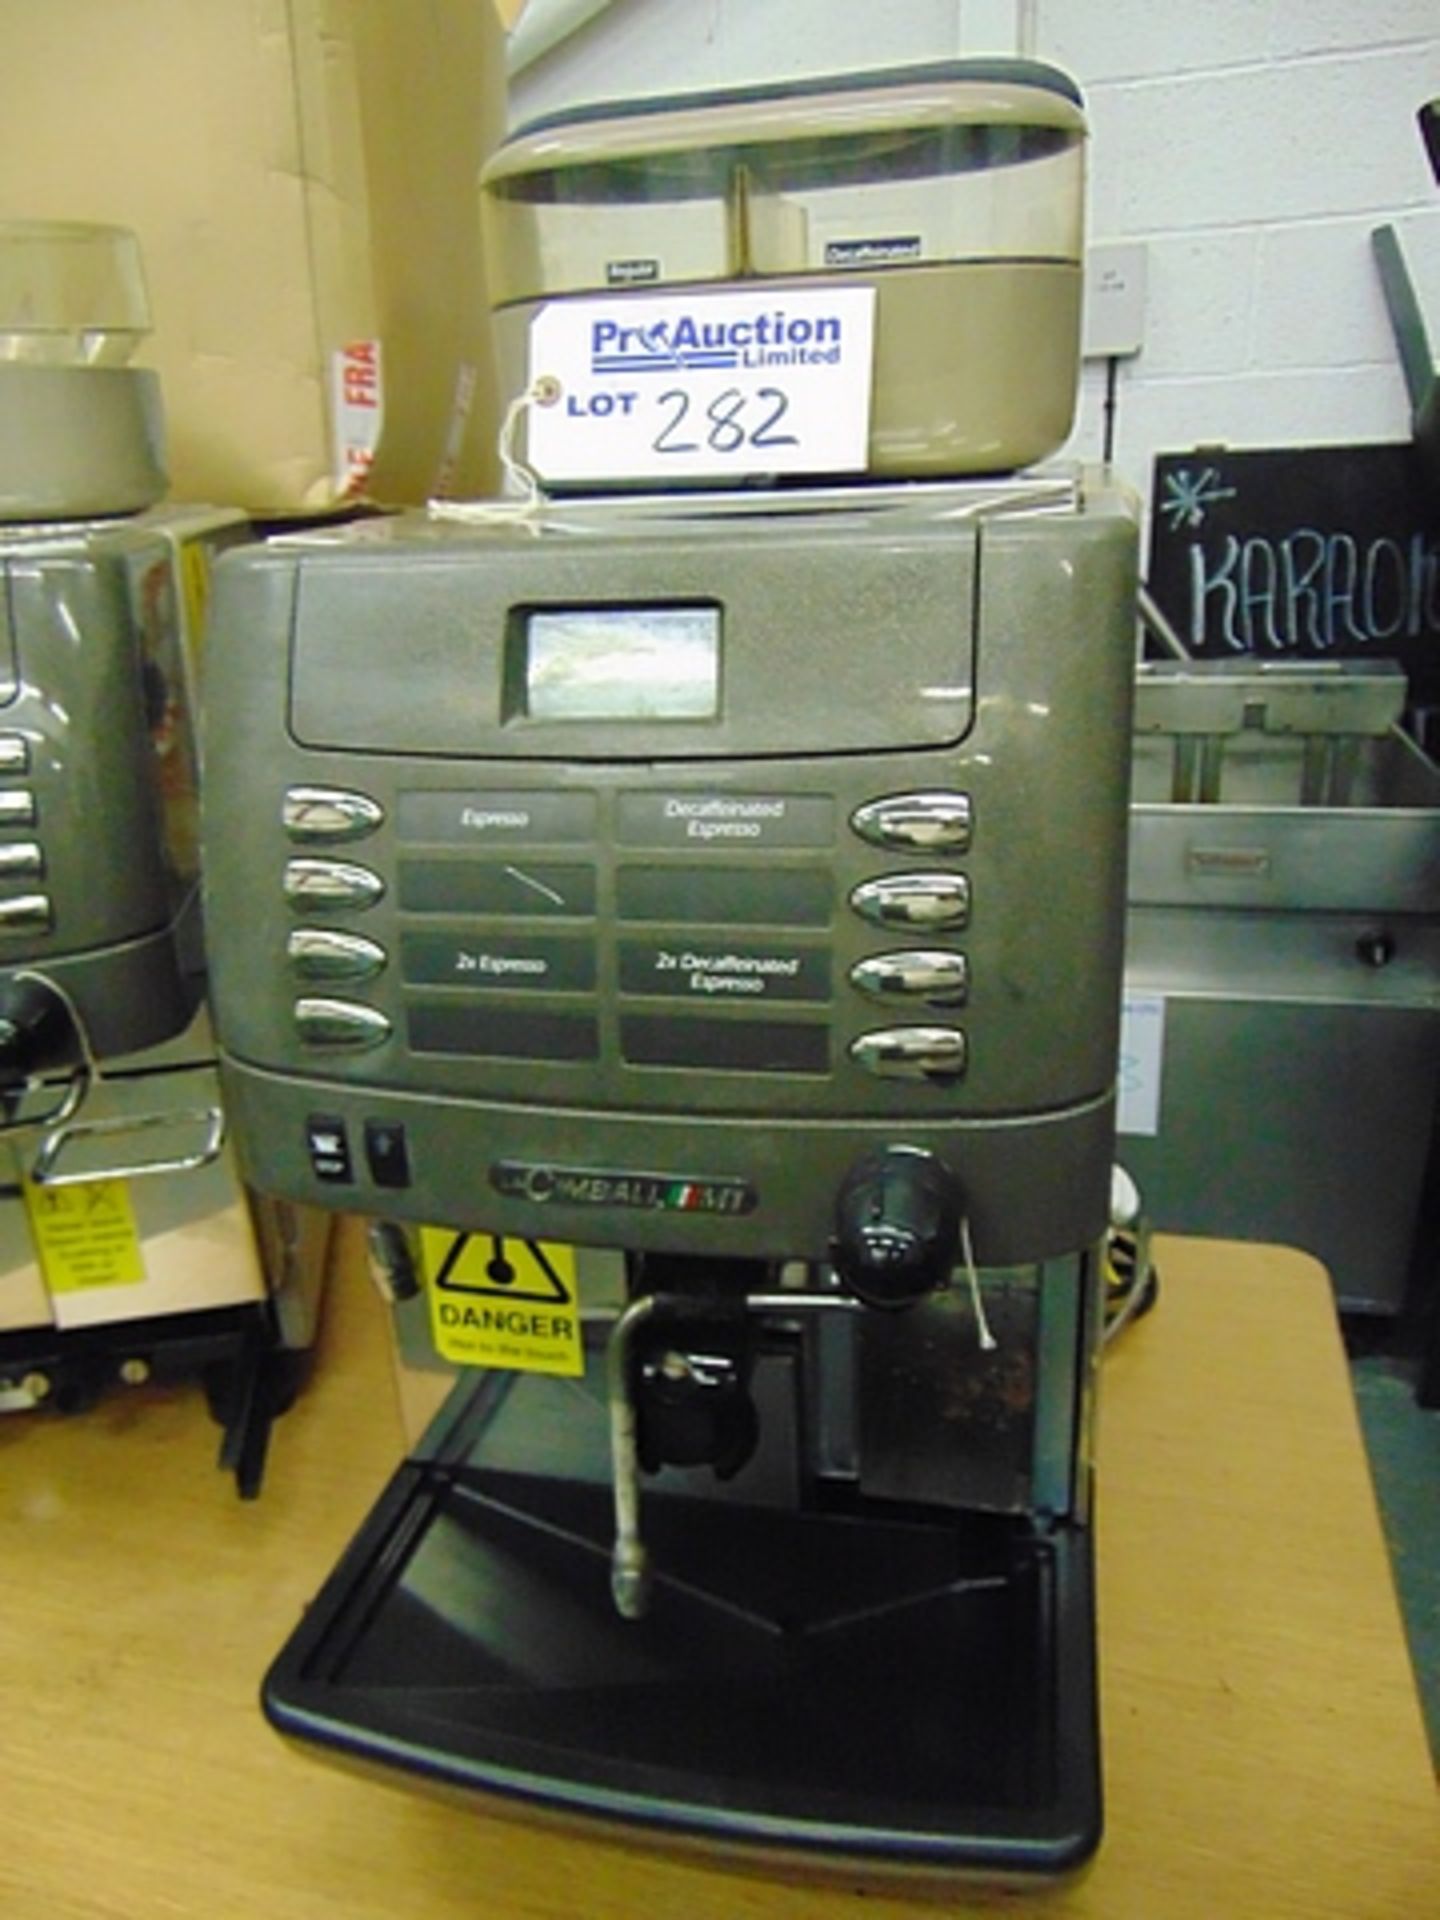 La Cimbali M1 Bean to Cup Coffee Machine 2.5 ltr smart boiler 2 grinder doser and 600g coffee bean